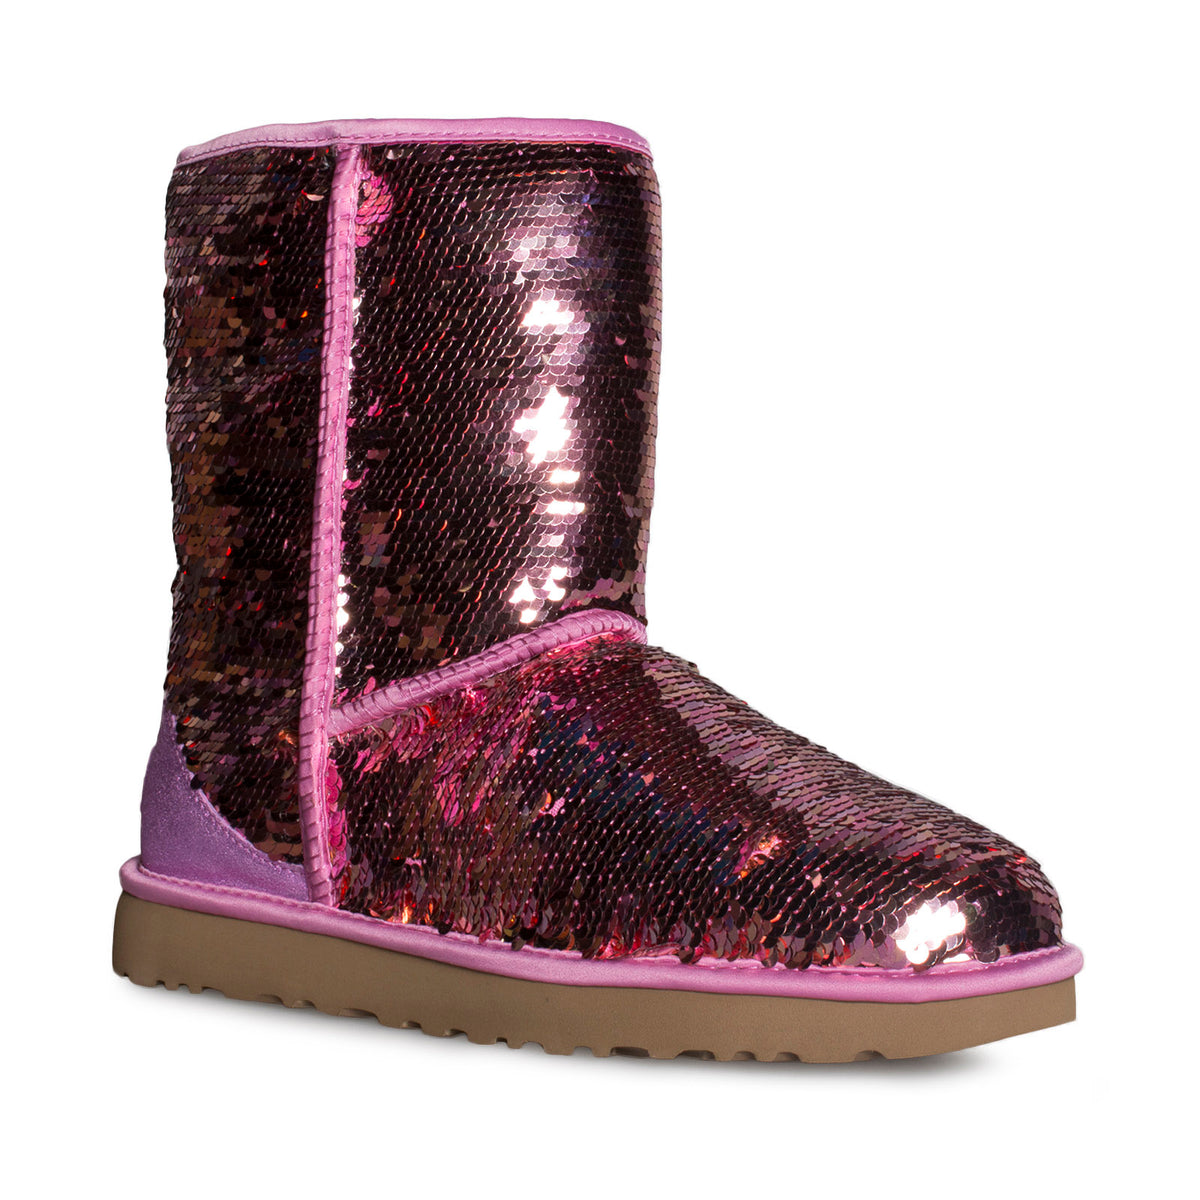 UGG Classic Short Sequin Pink Boots - Women's – MyCozyBoots